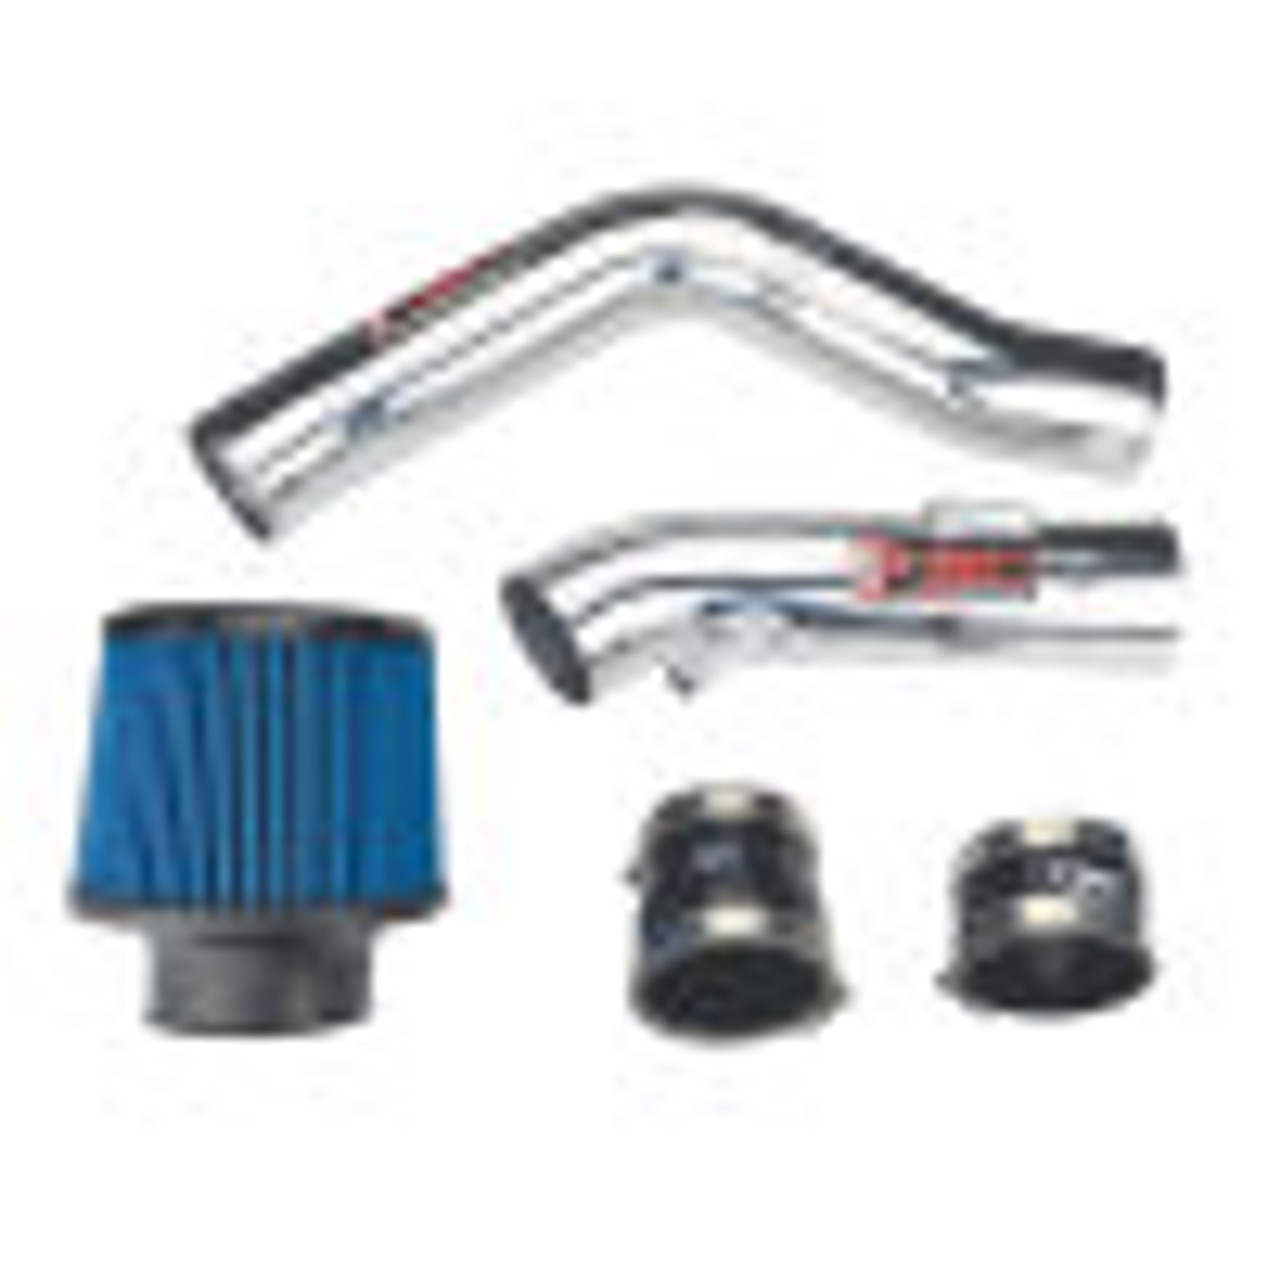 NISSAN COLD AIR INTAKE SYSTEM
Color: Polished.  Intake Color: Polished.  Filter Color: Blue